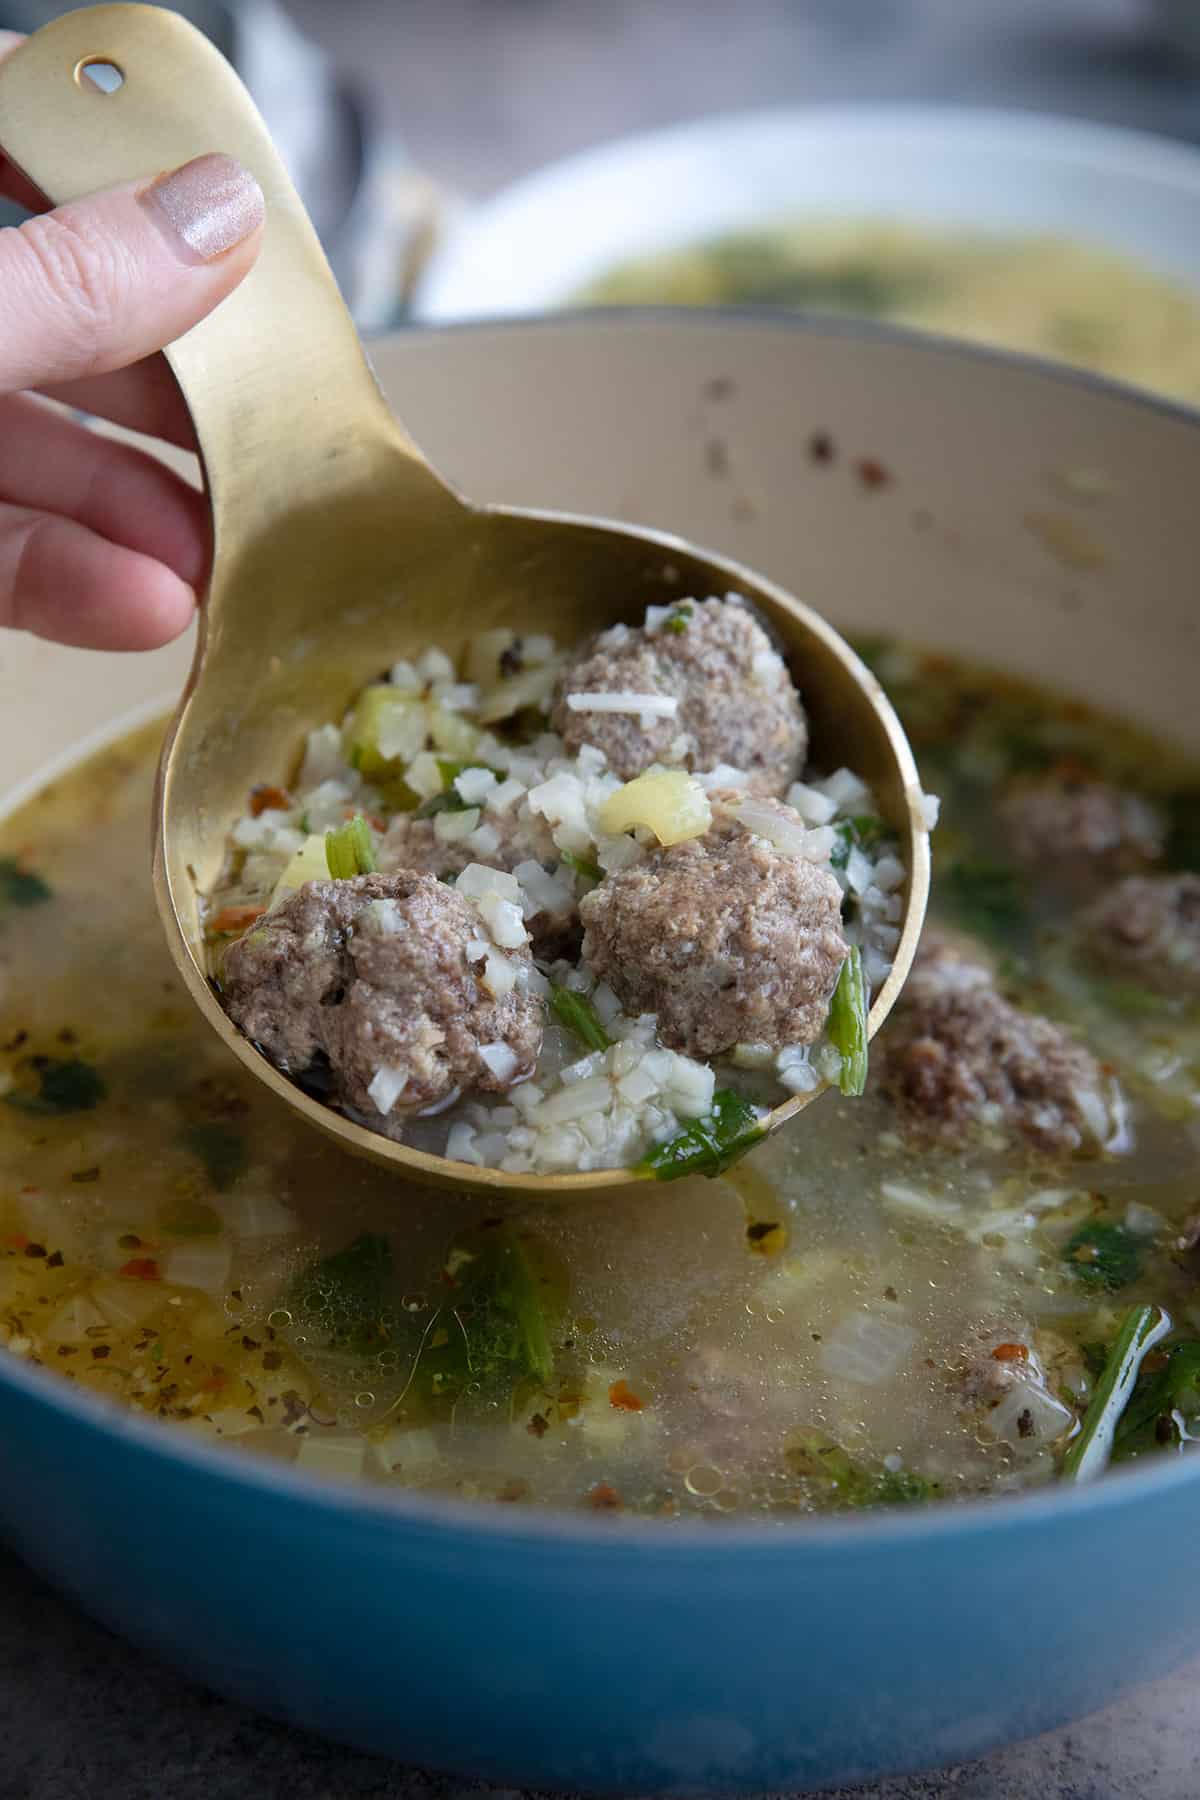 A ladle filled with Italian wedding soup over the pot of soup.